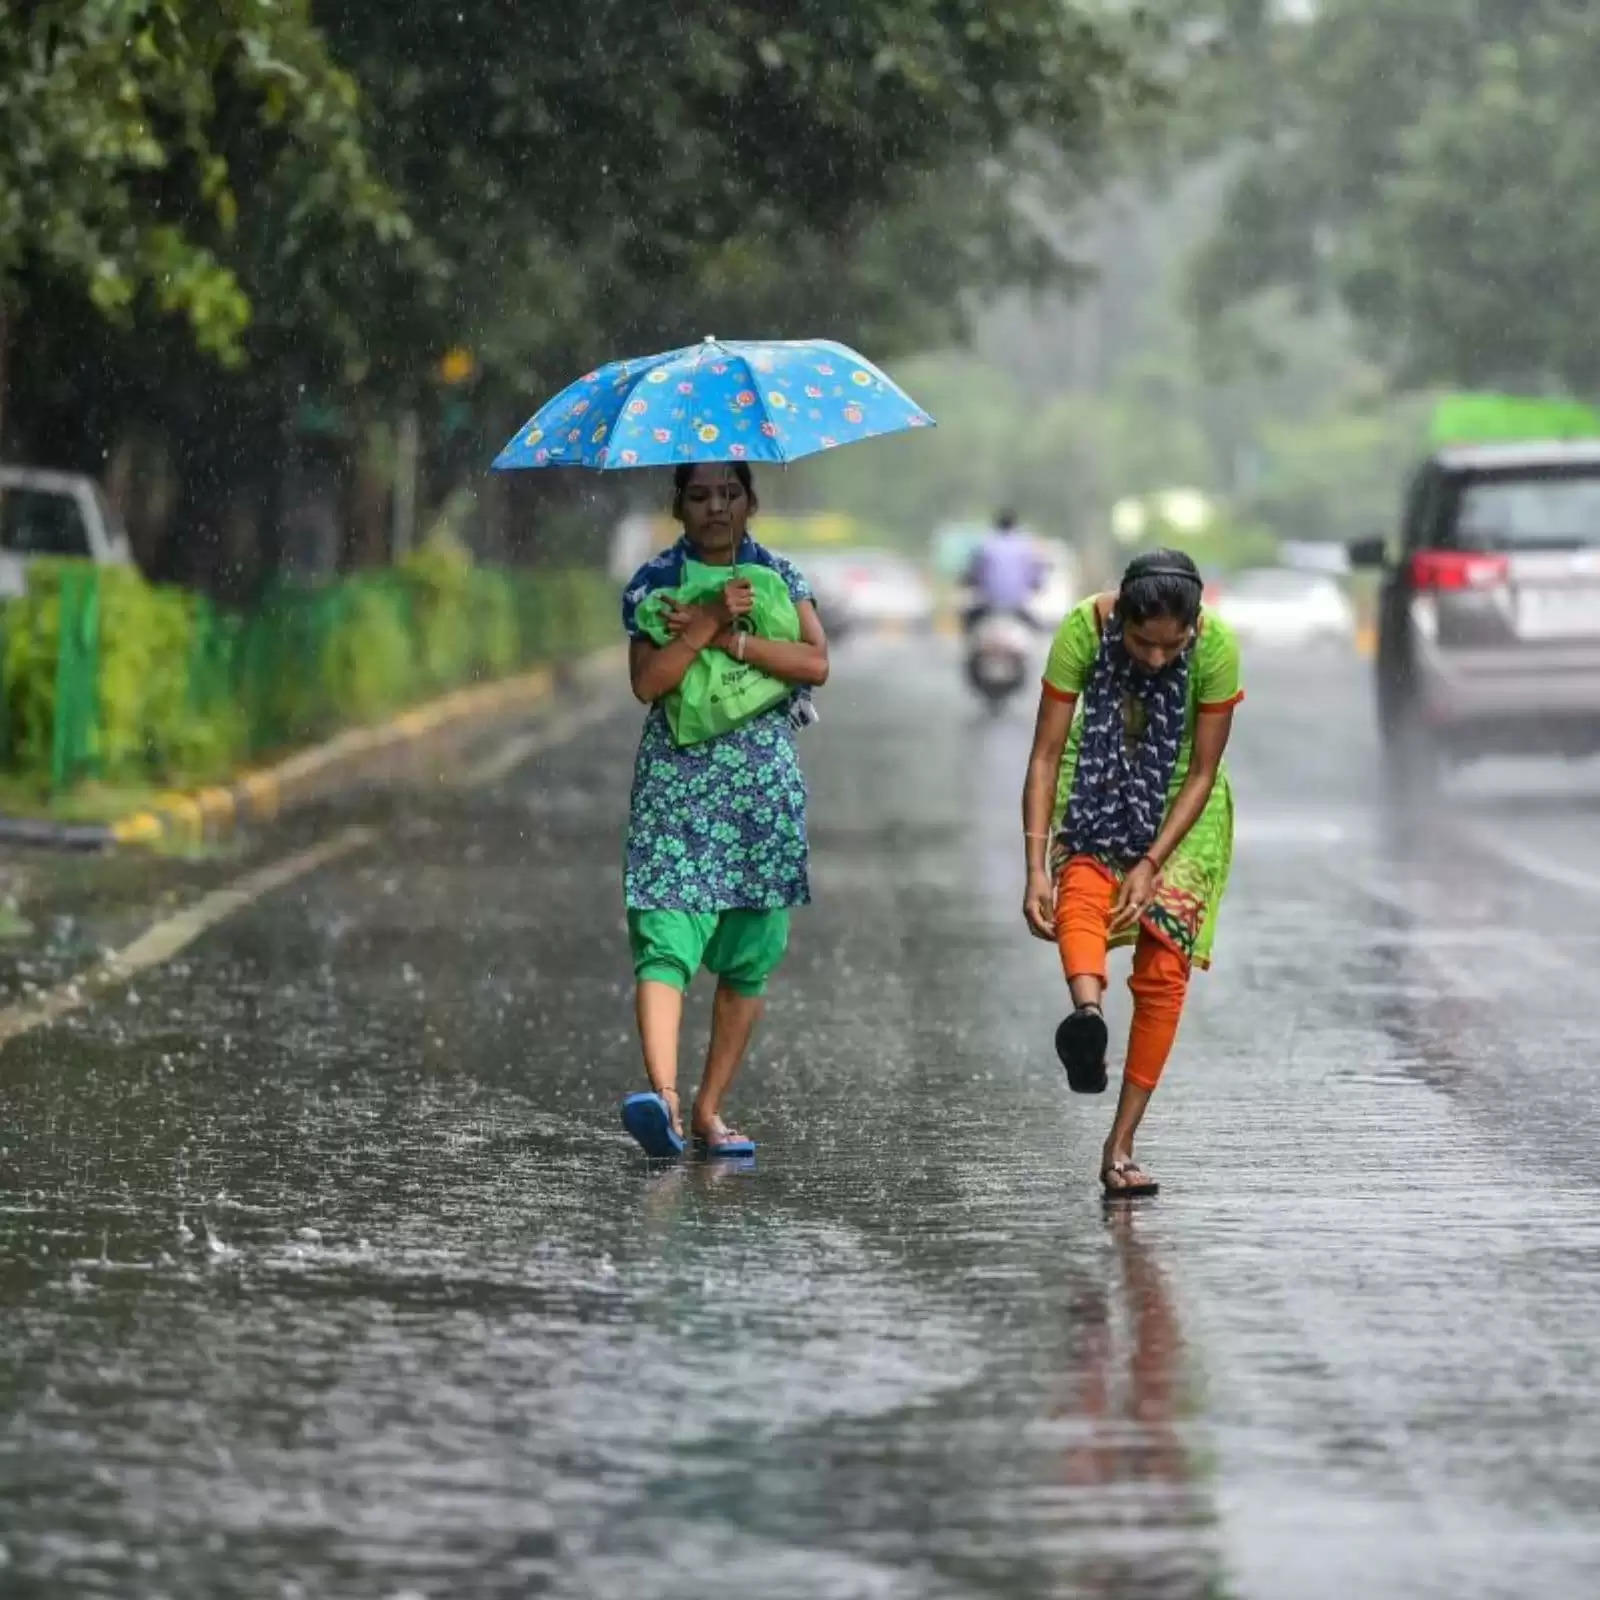 IMD forecasts very severe rains in several states through August 23. This is a forecast check